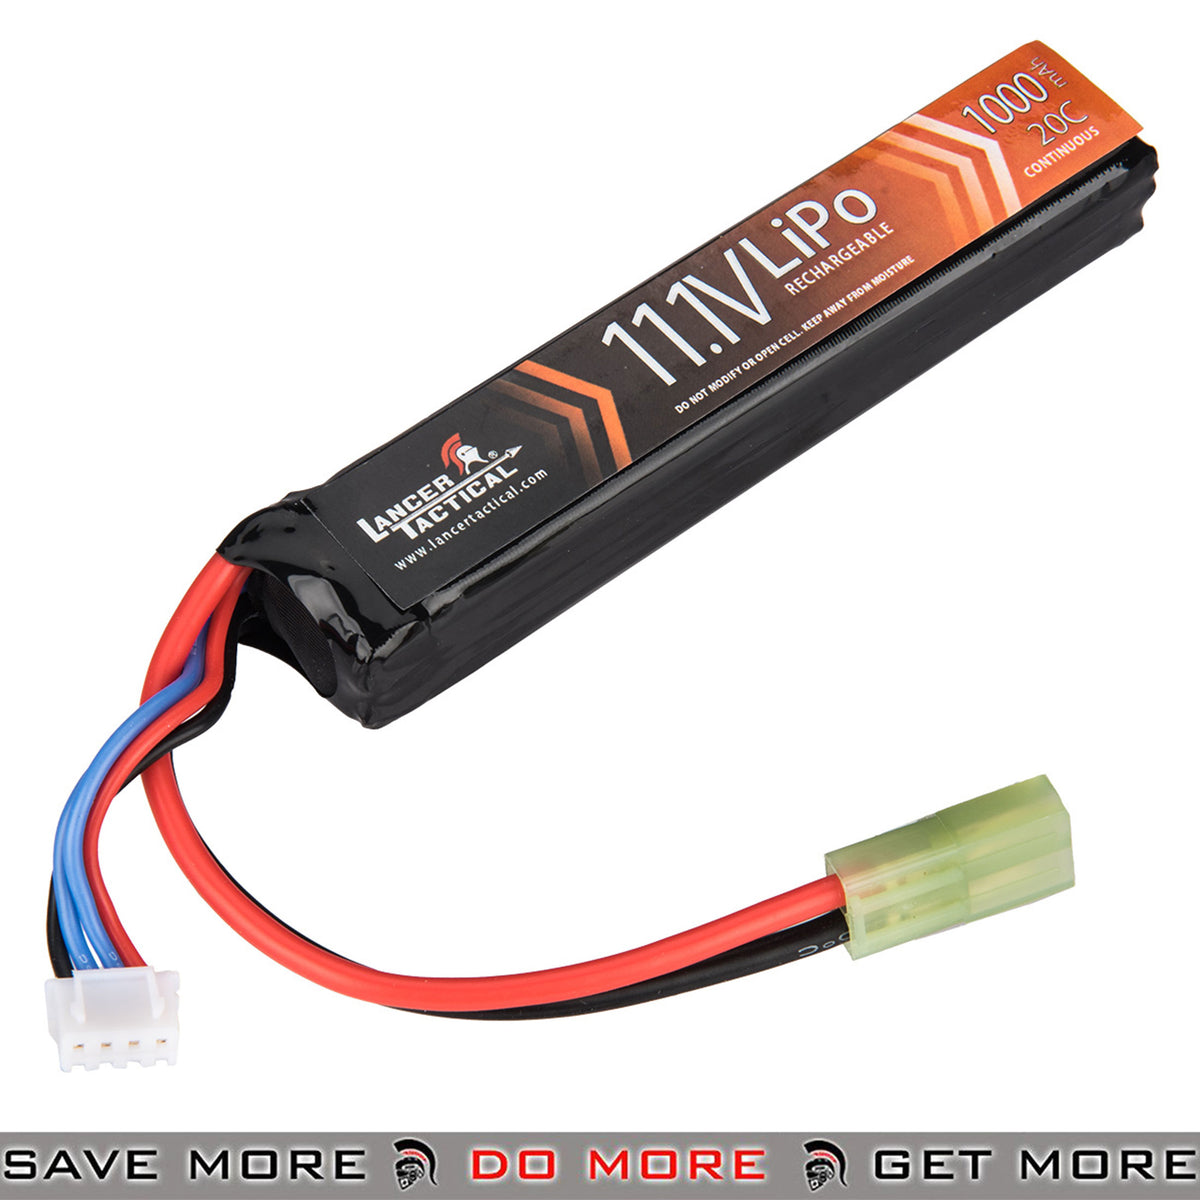 Gunfire Blog  What should you know about LiPo batteries for airsoft  replicas?